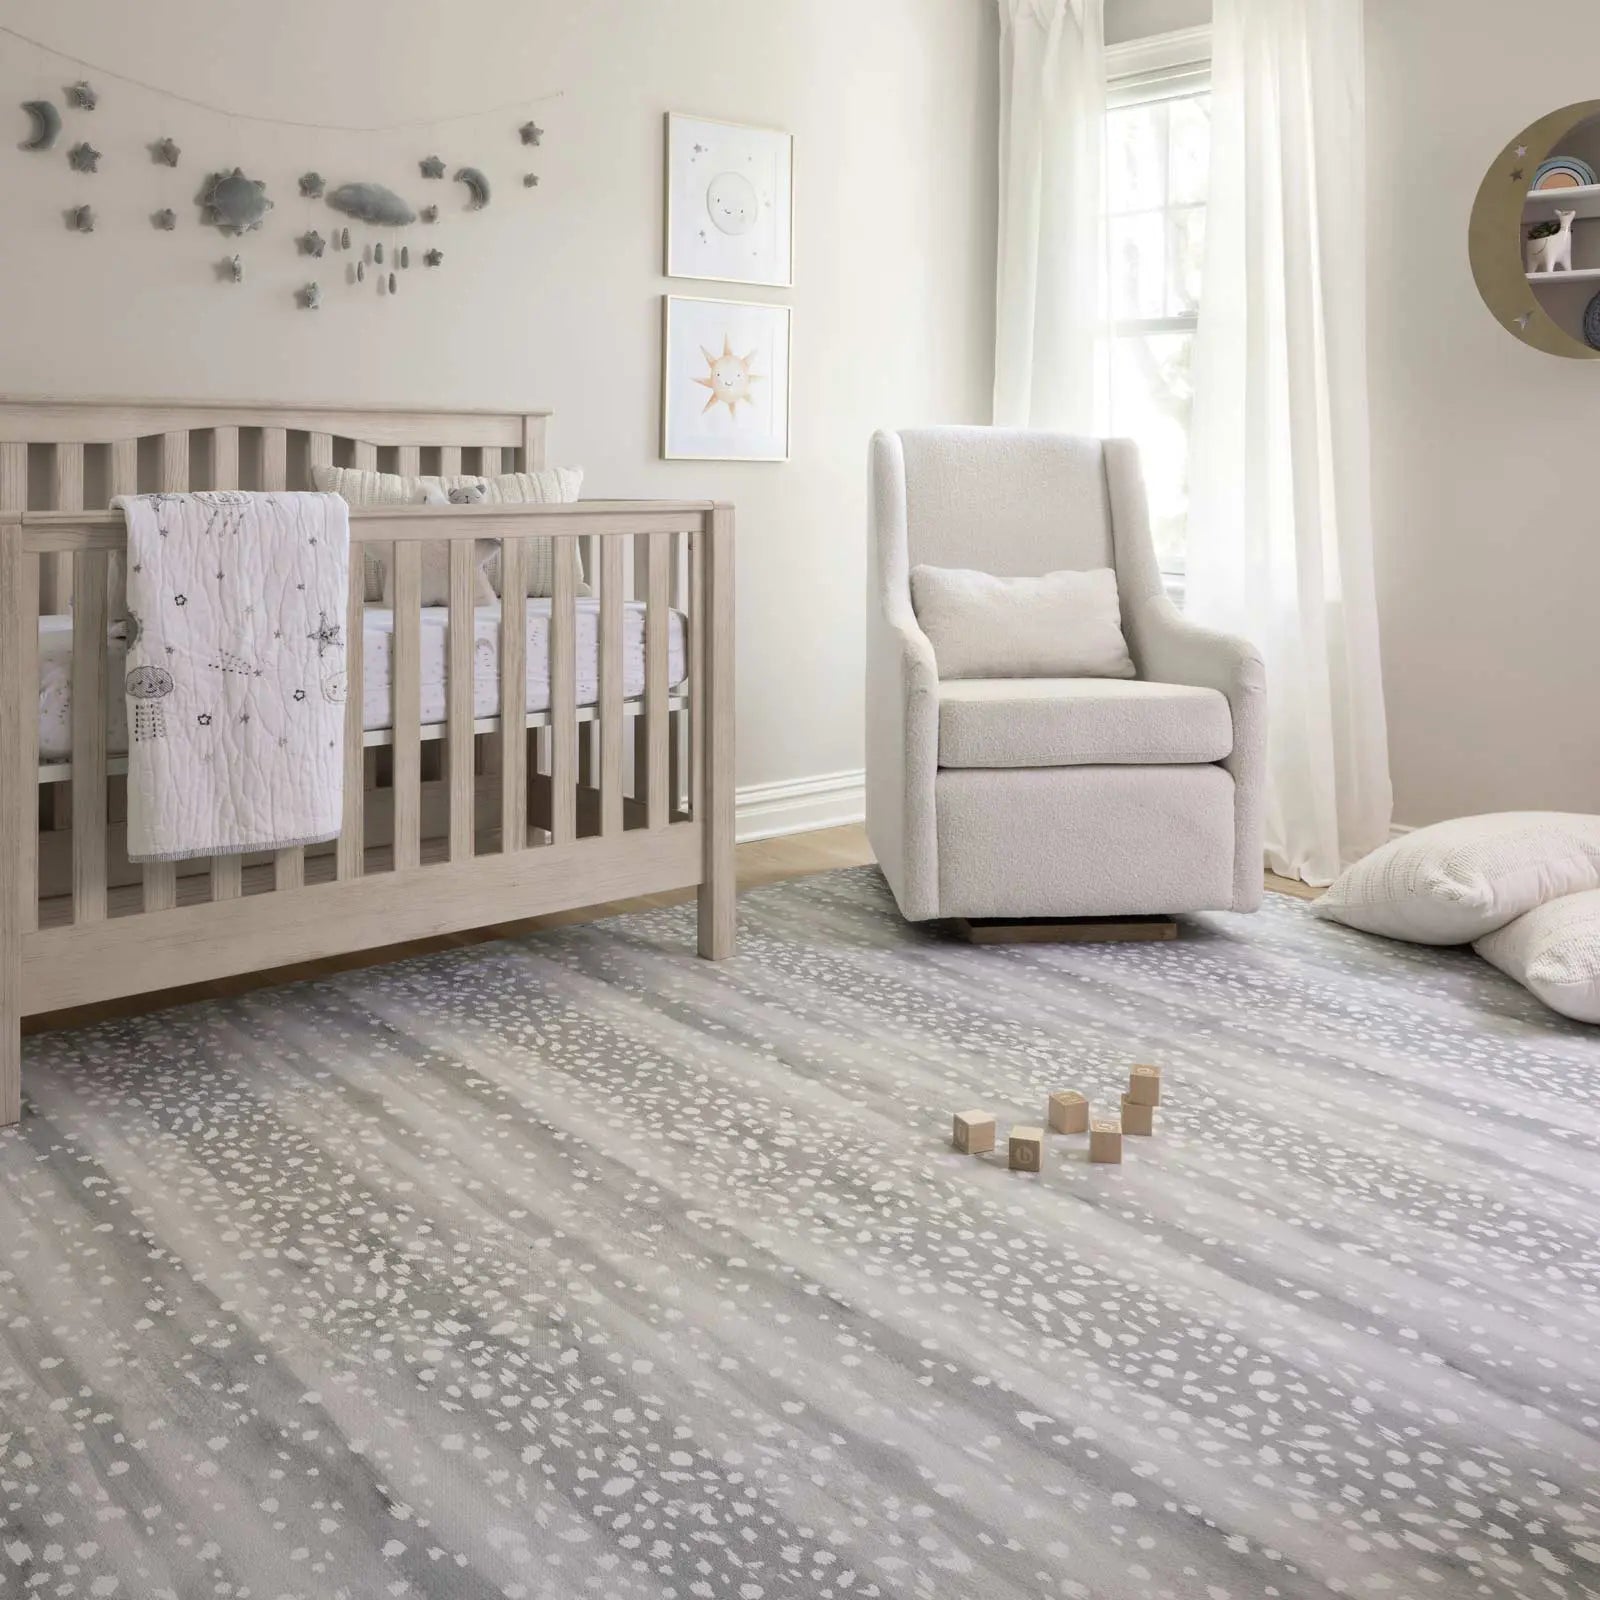 Fawn silver gray animal print play mat shown in nursery with crib, rocker, and blocks on the mat.